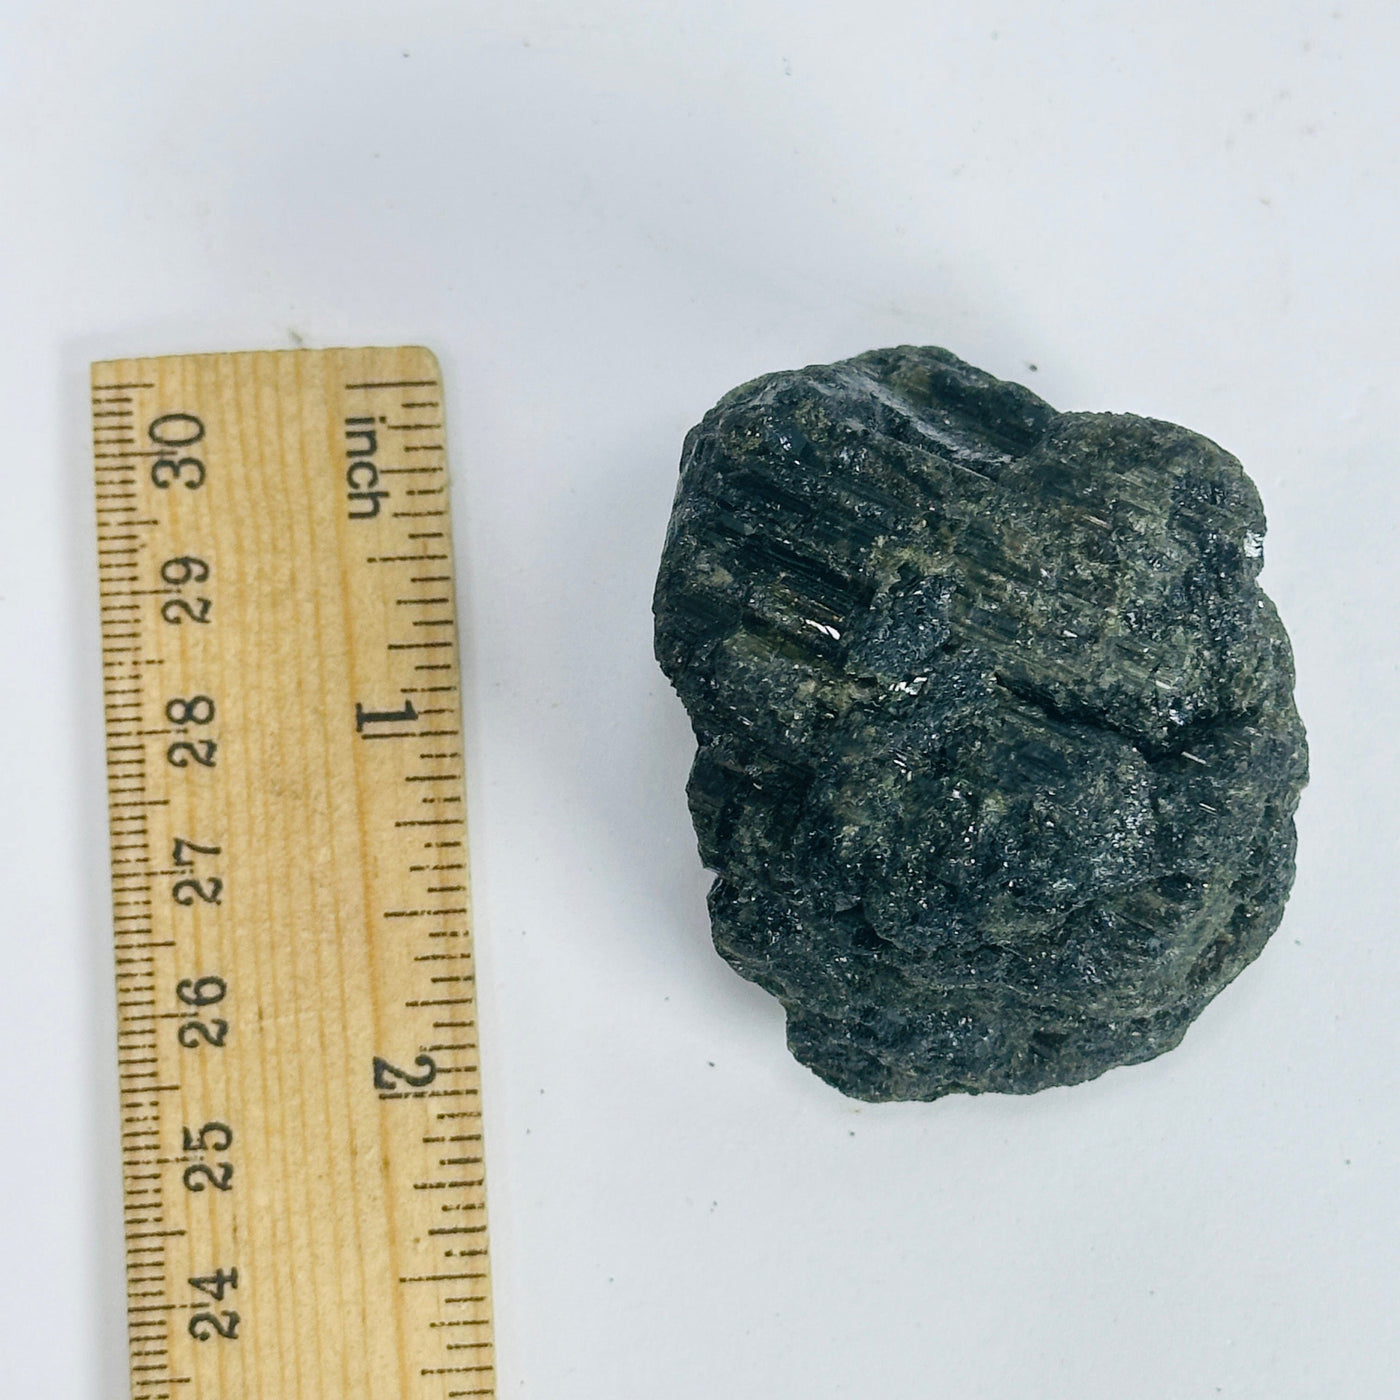 green tourmaline next to a ruler for size reference